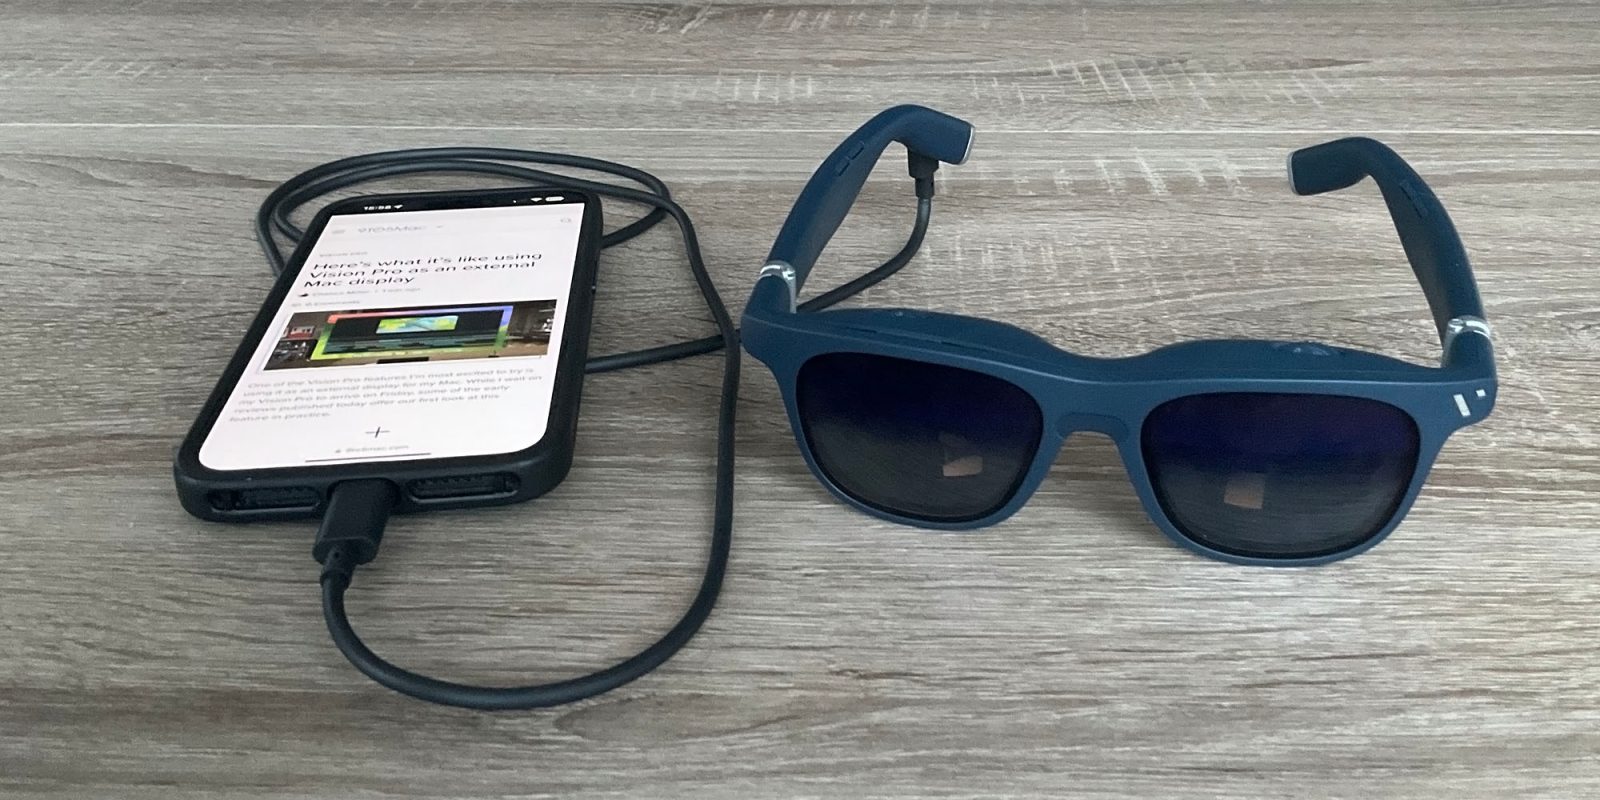 Viture One XR glasses connected to an iPhone 15 Pro Max